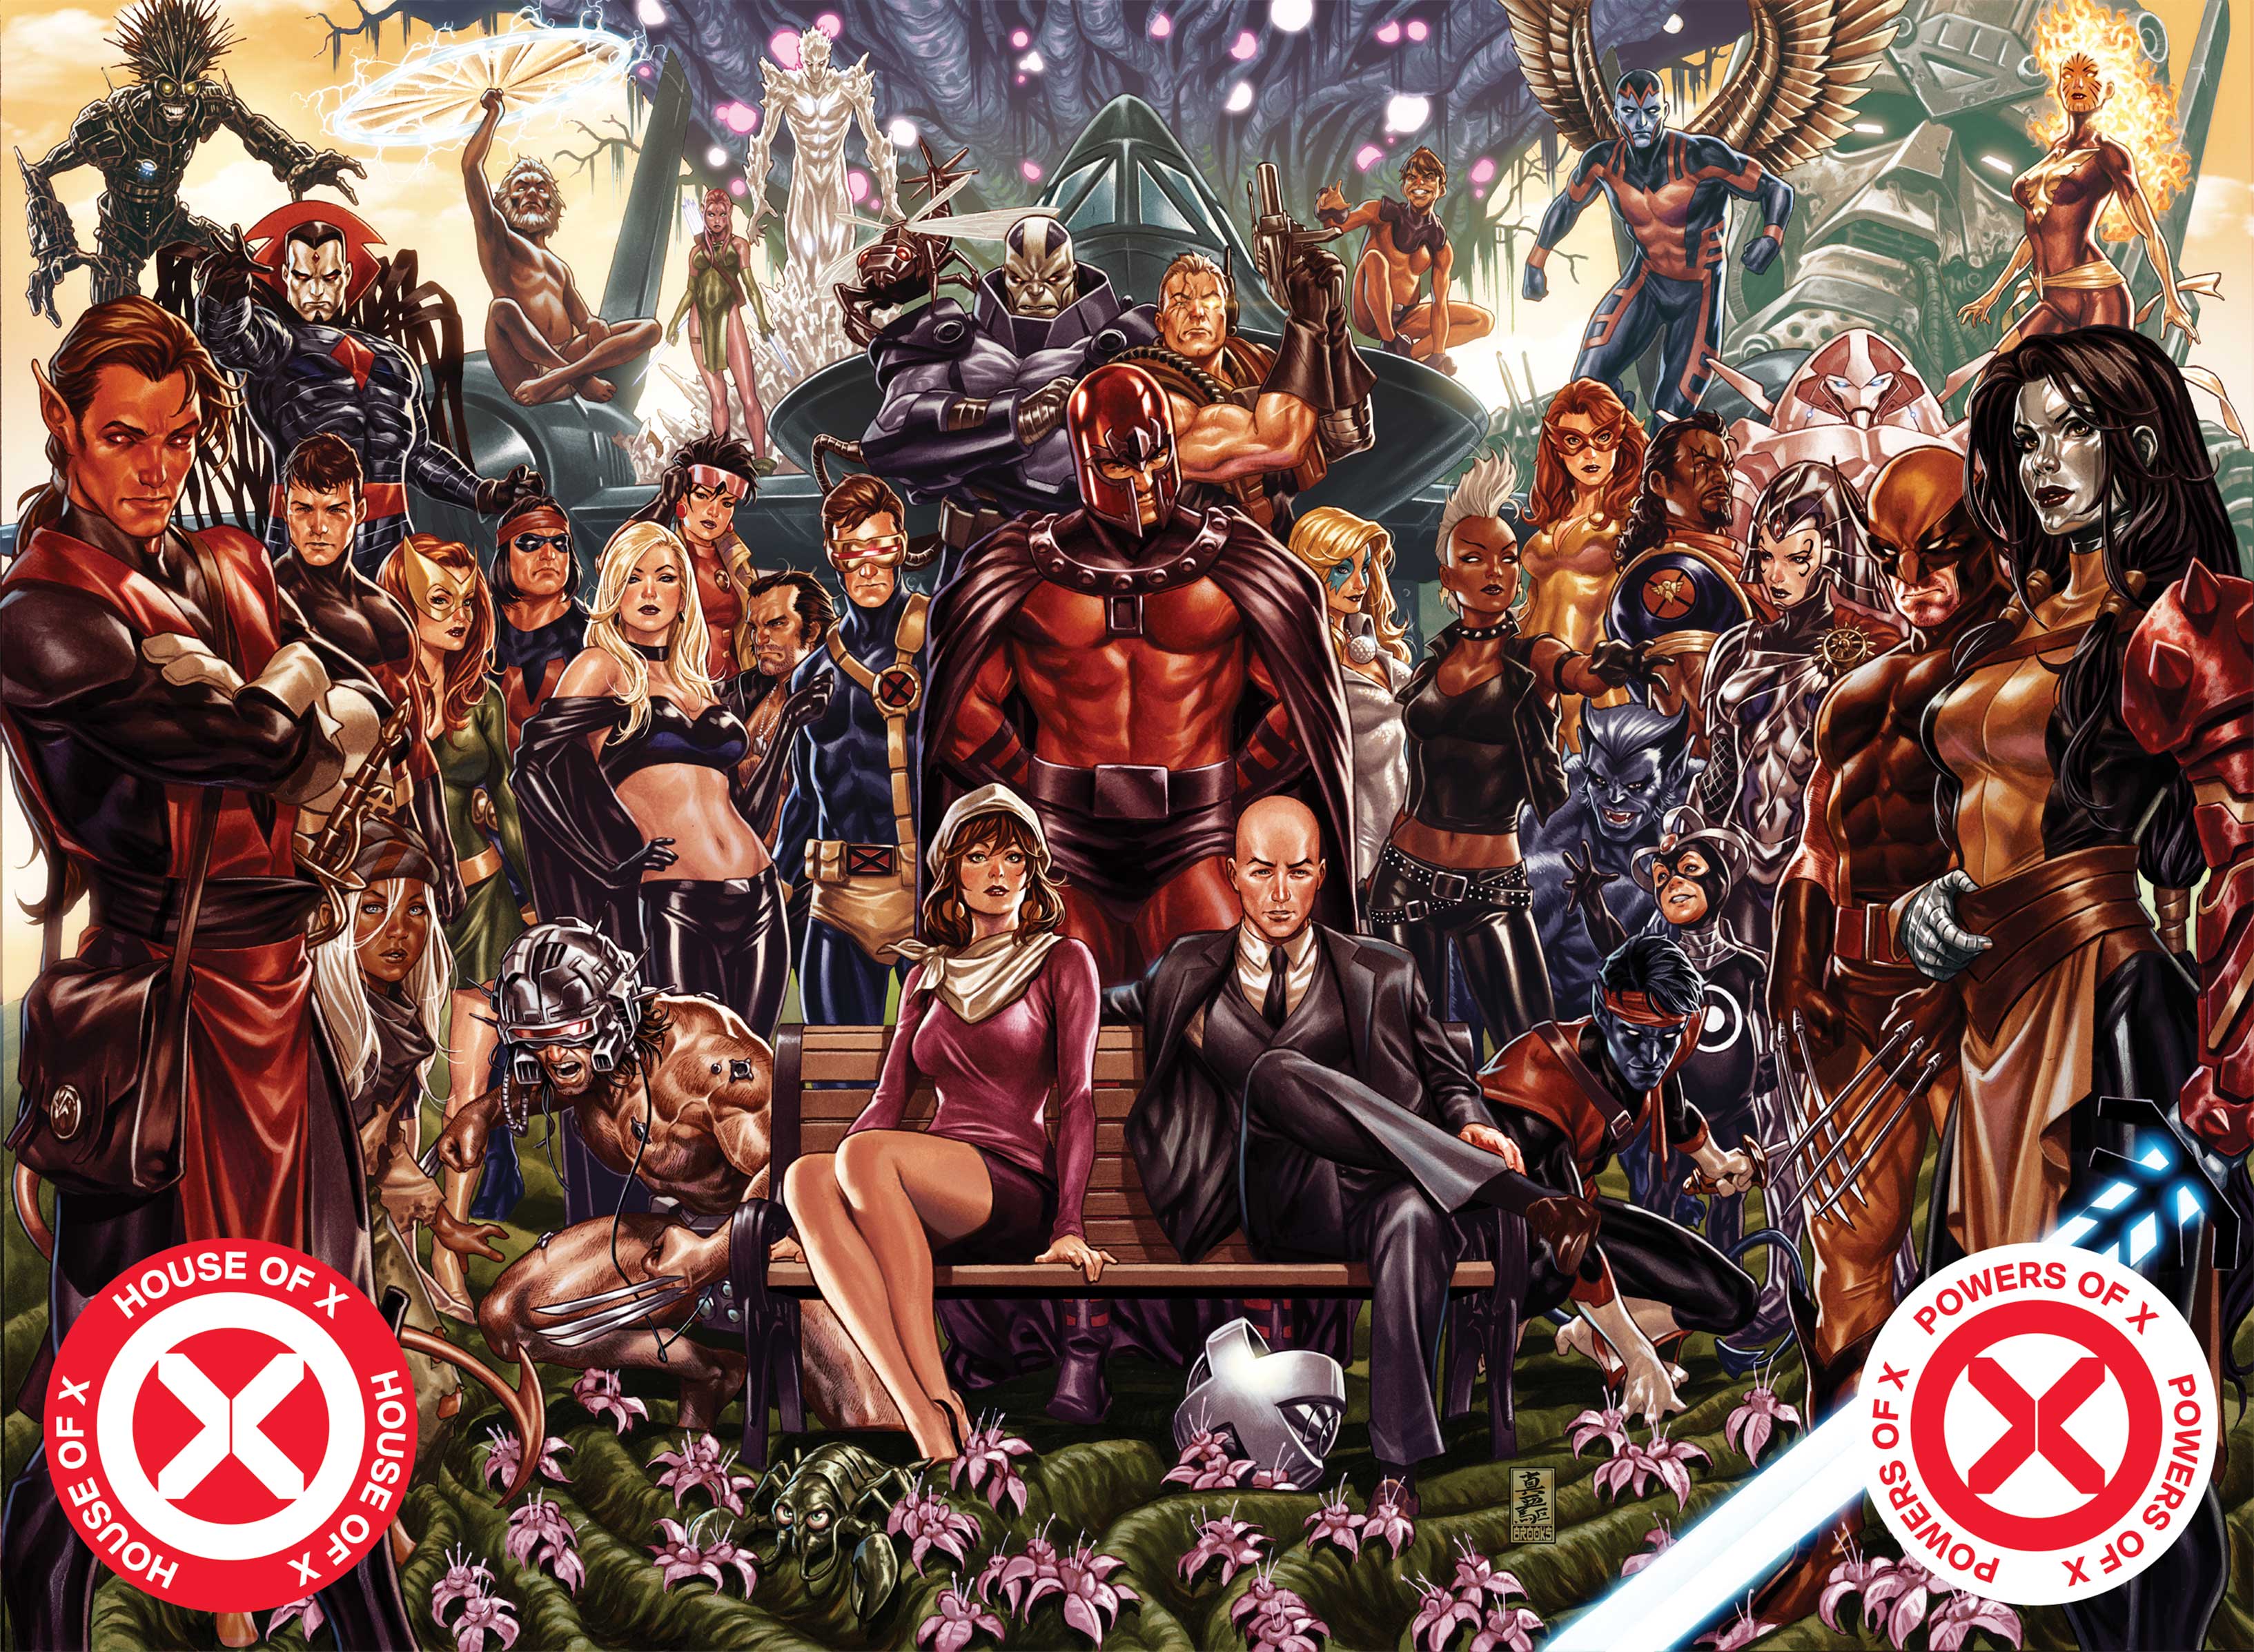 House of X/Powers of X HC review: A look inside the revolutionary project